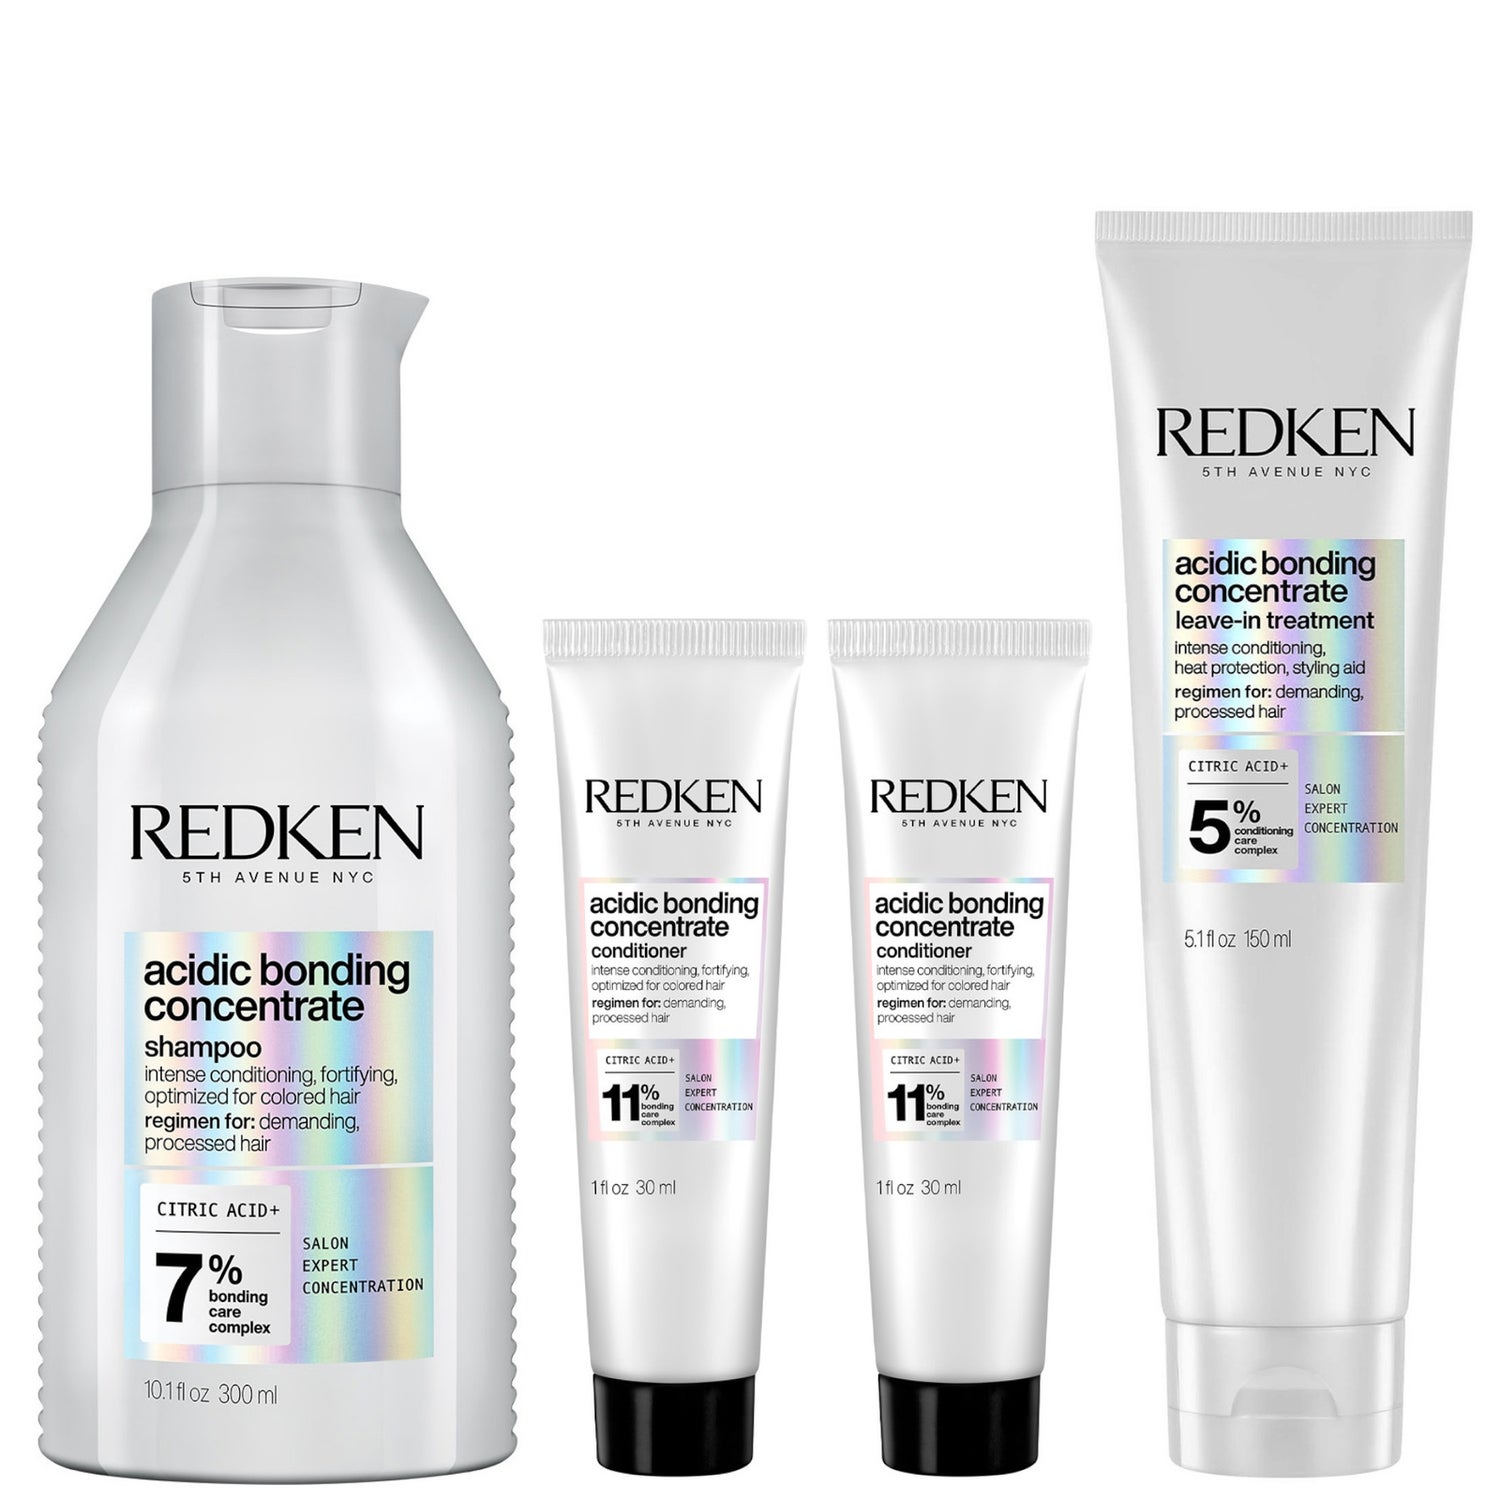 Redken Acidic Bonding Concentrate Shampoo 300ml, 2x Conditioner 30ml, and Leave-in Hair Treatment 150ml Bundle